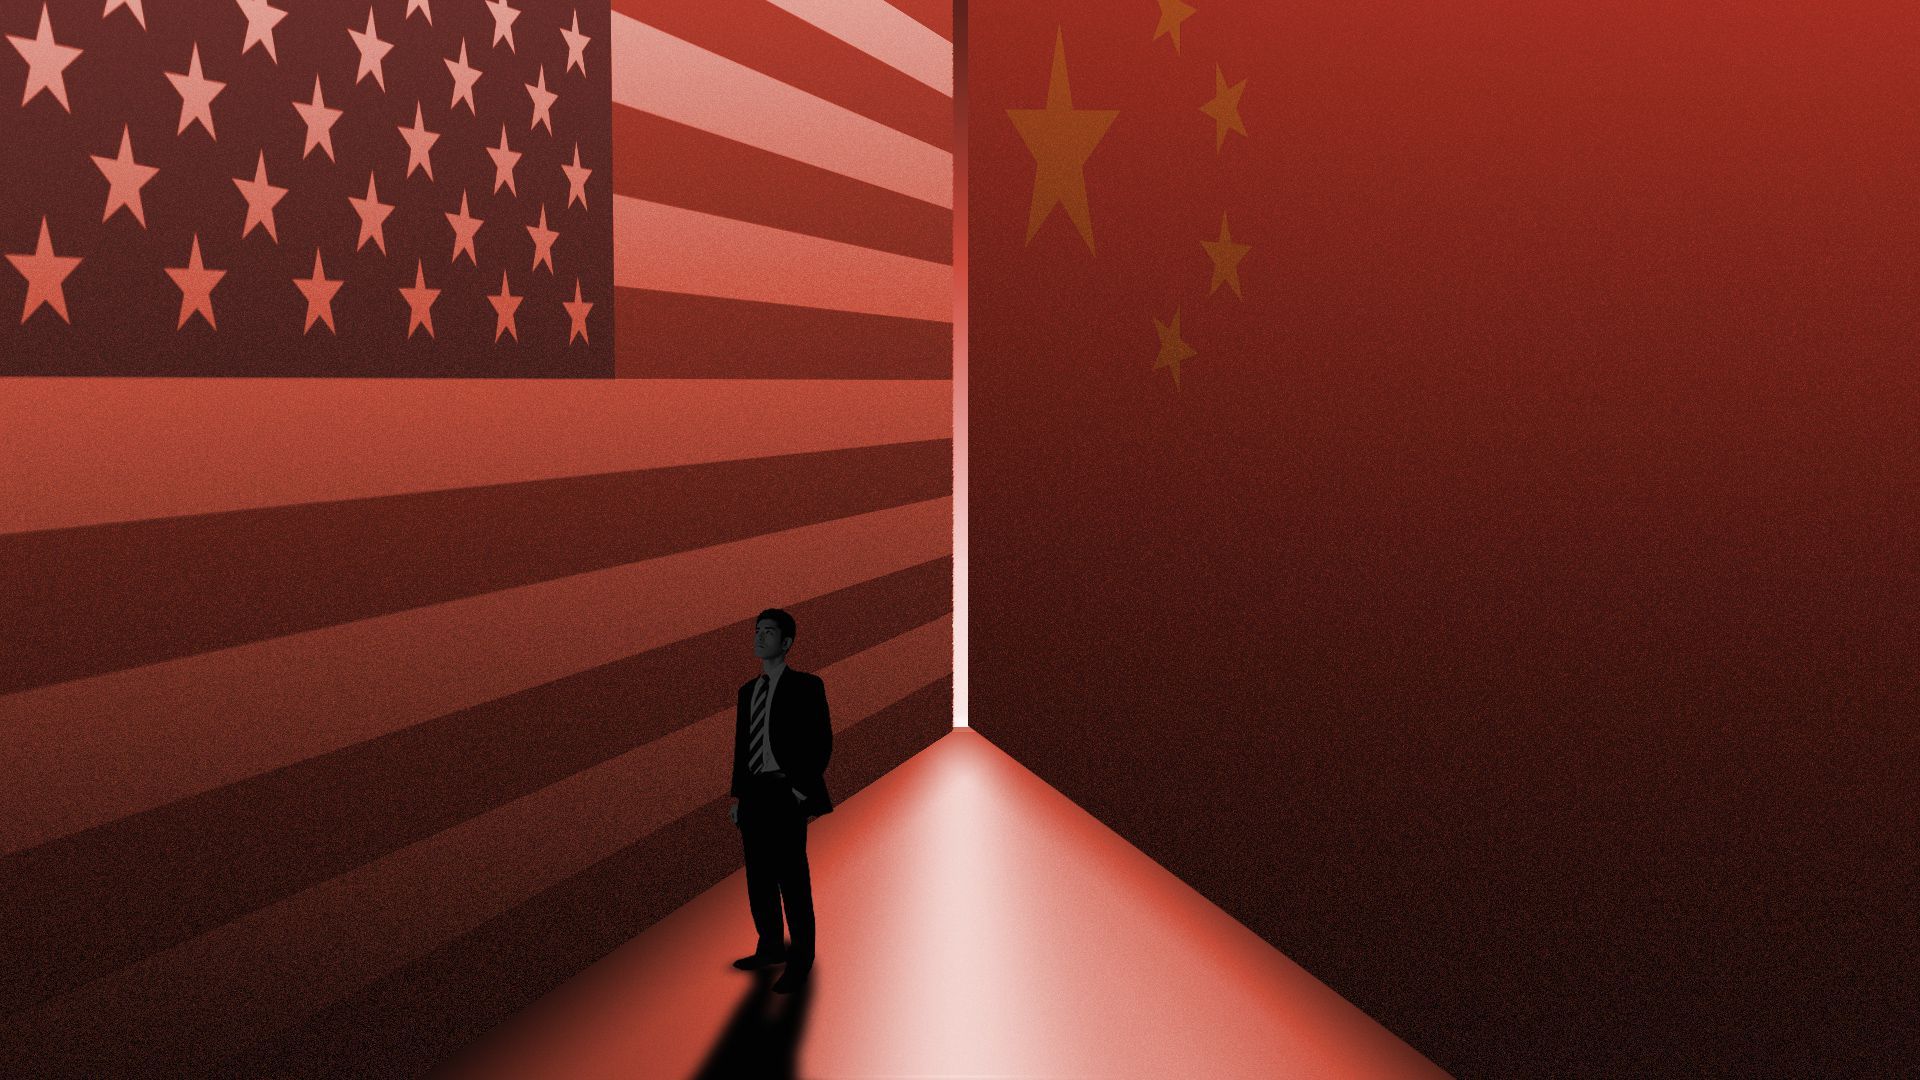 Illustration of a person standing between a US and Chinese flag